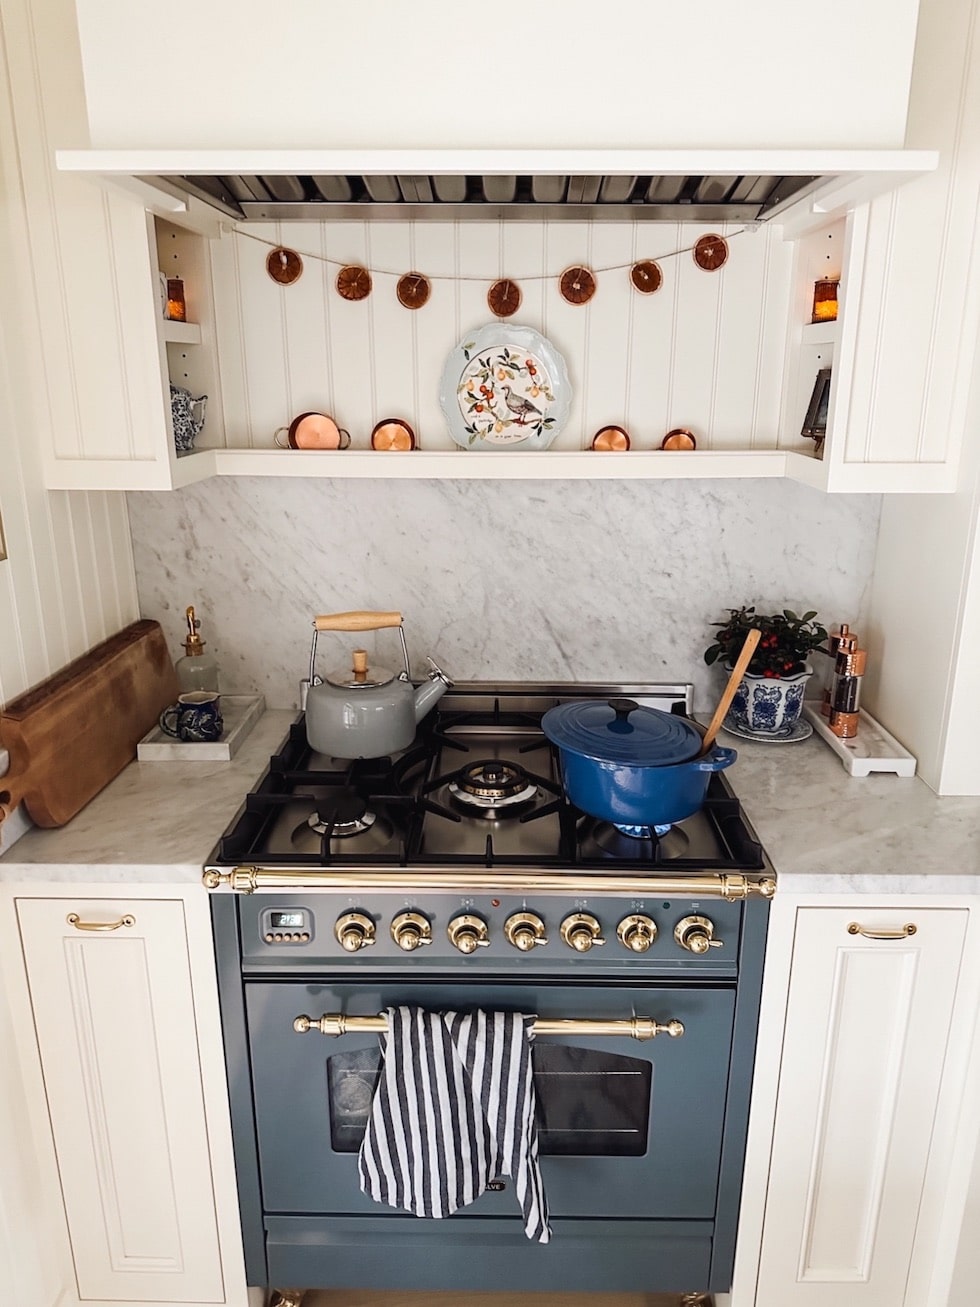 The Story of Our English-Inspired Cottage Kitchen at Christmas